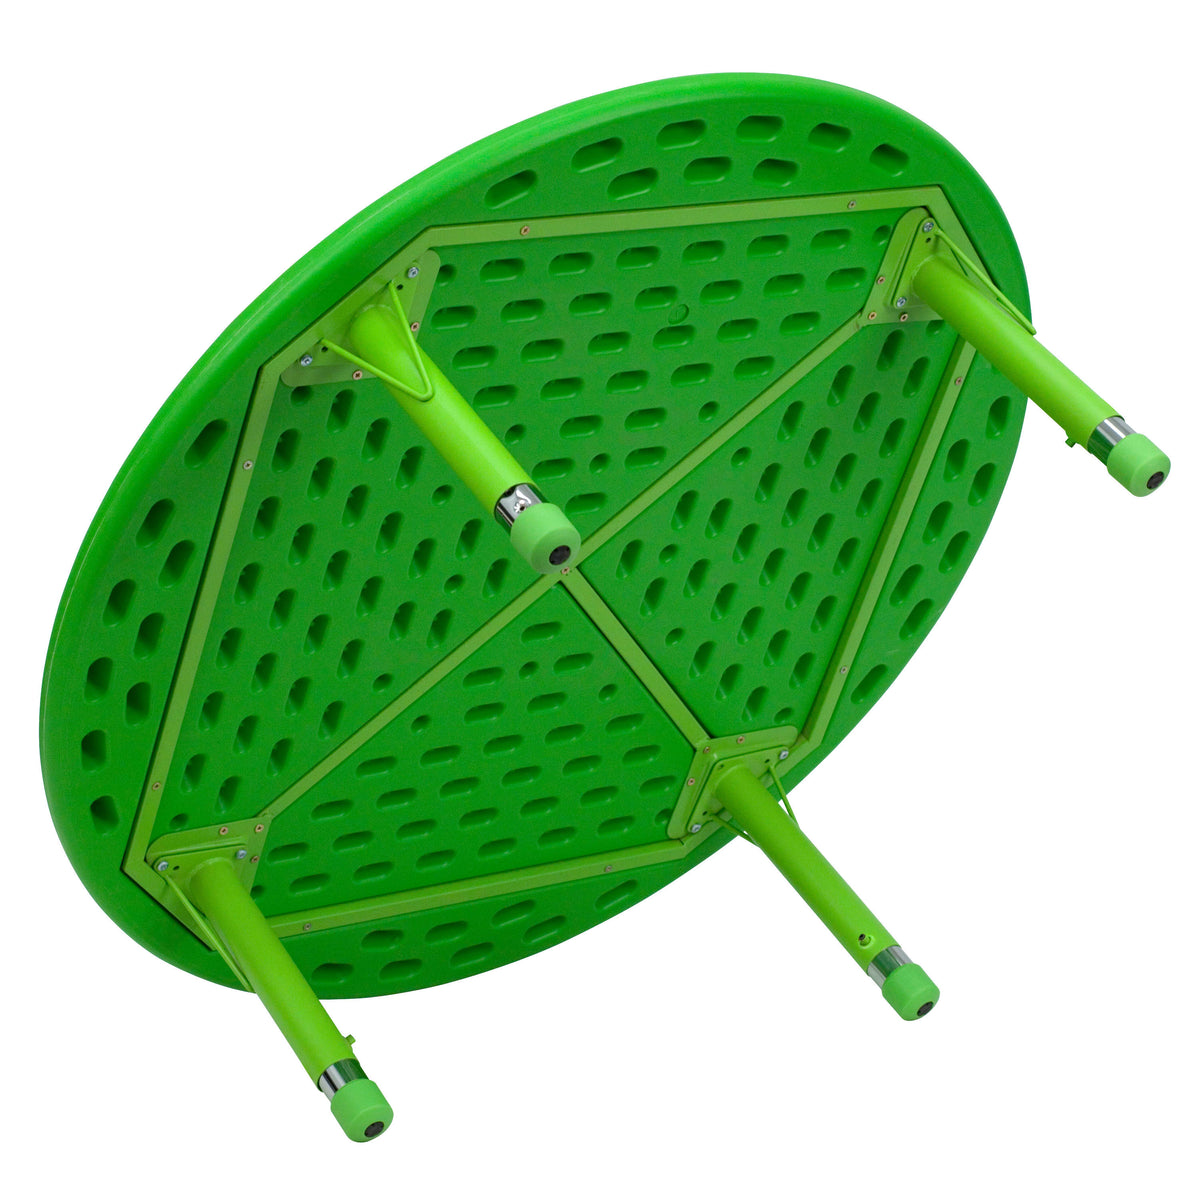 Green |#| 45inch Round Green Plastic Height Adjustable Activity Table